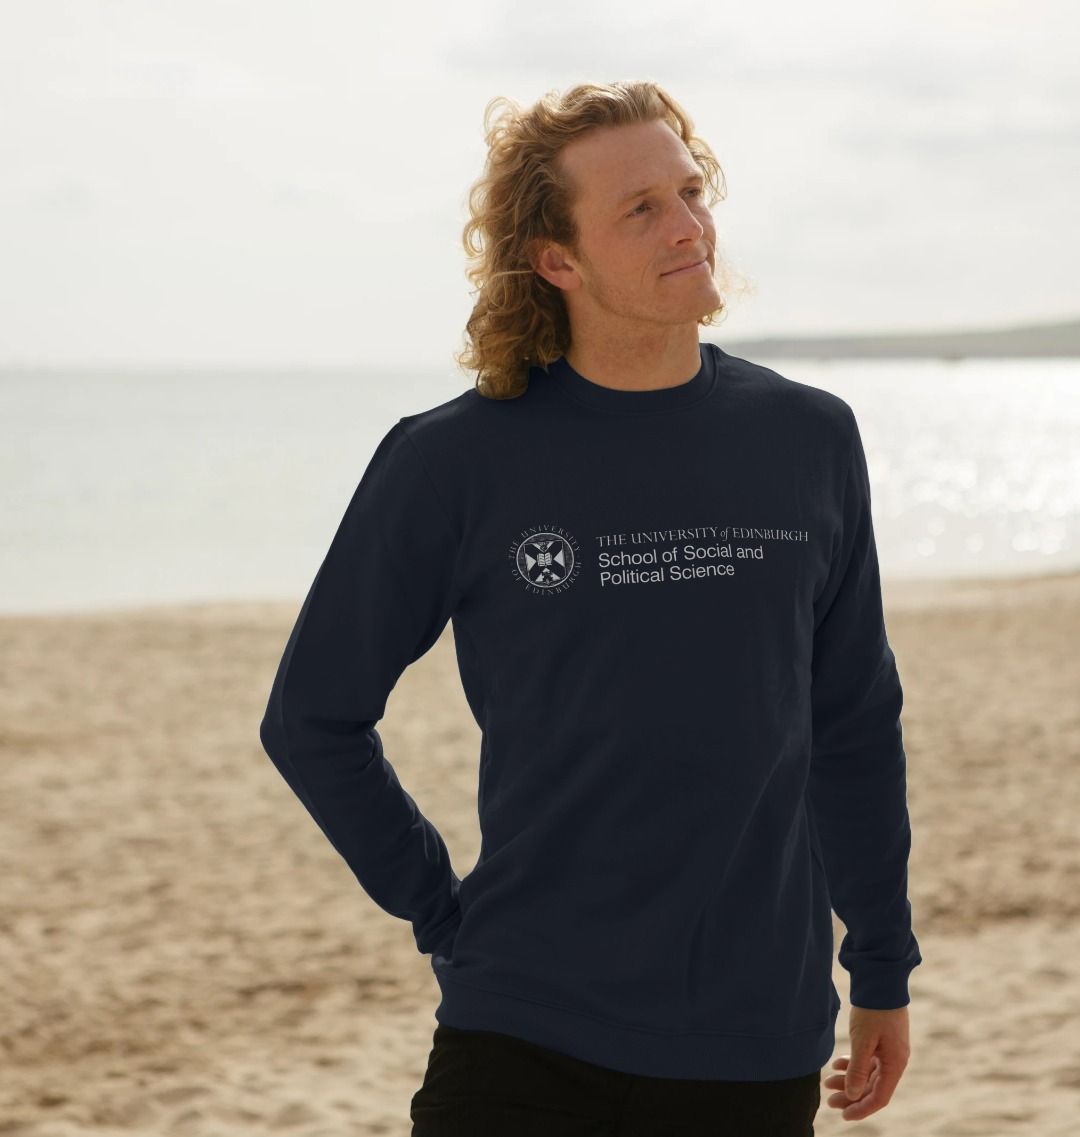 A model wearing our School of Social and Political Science Sweatshirt